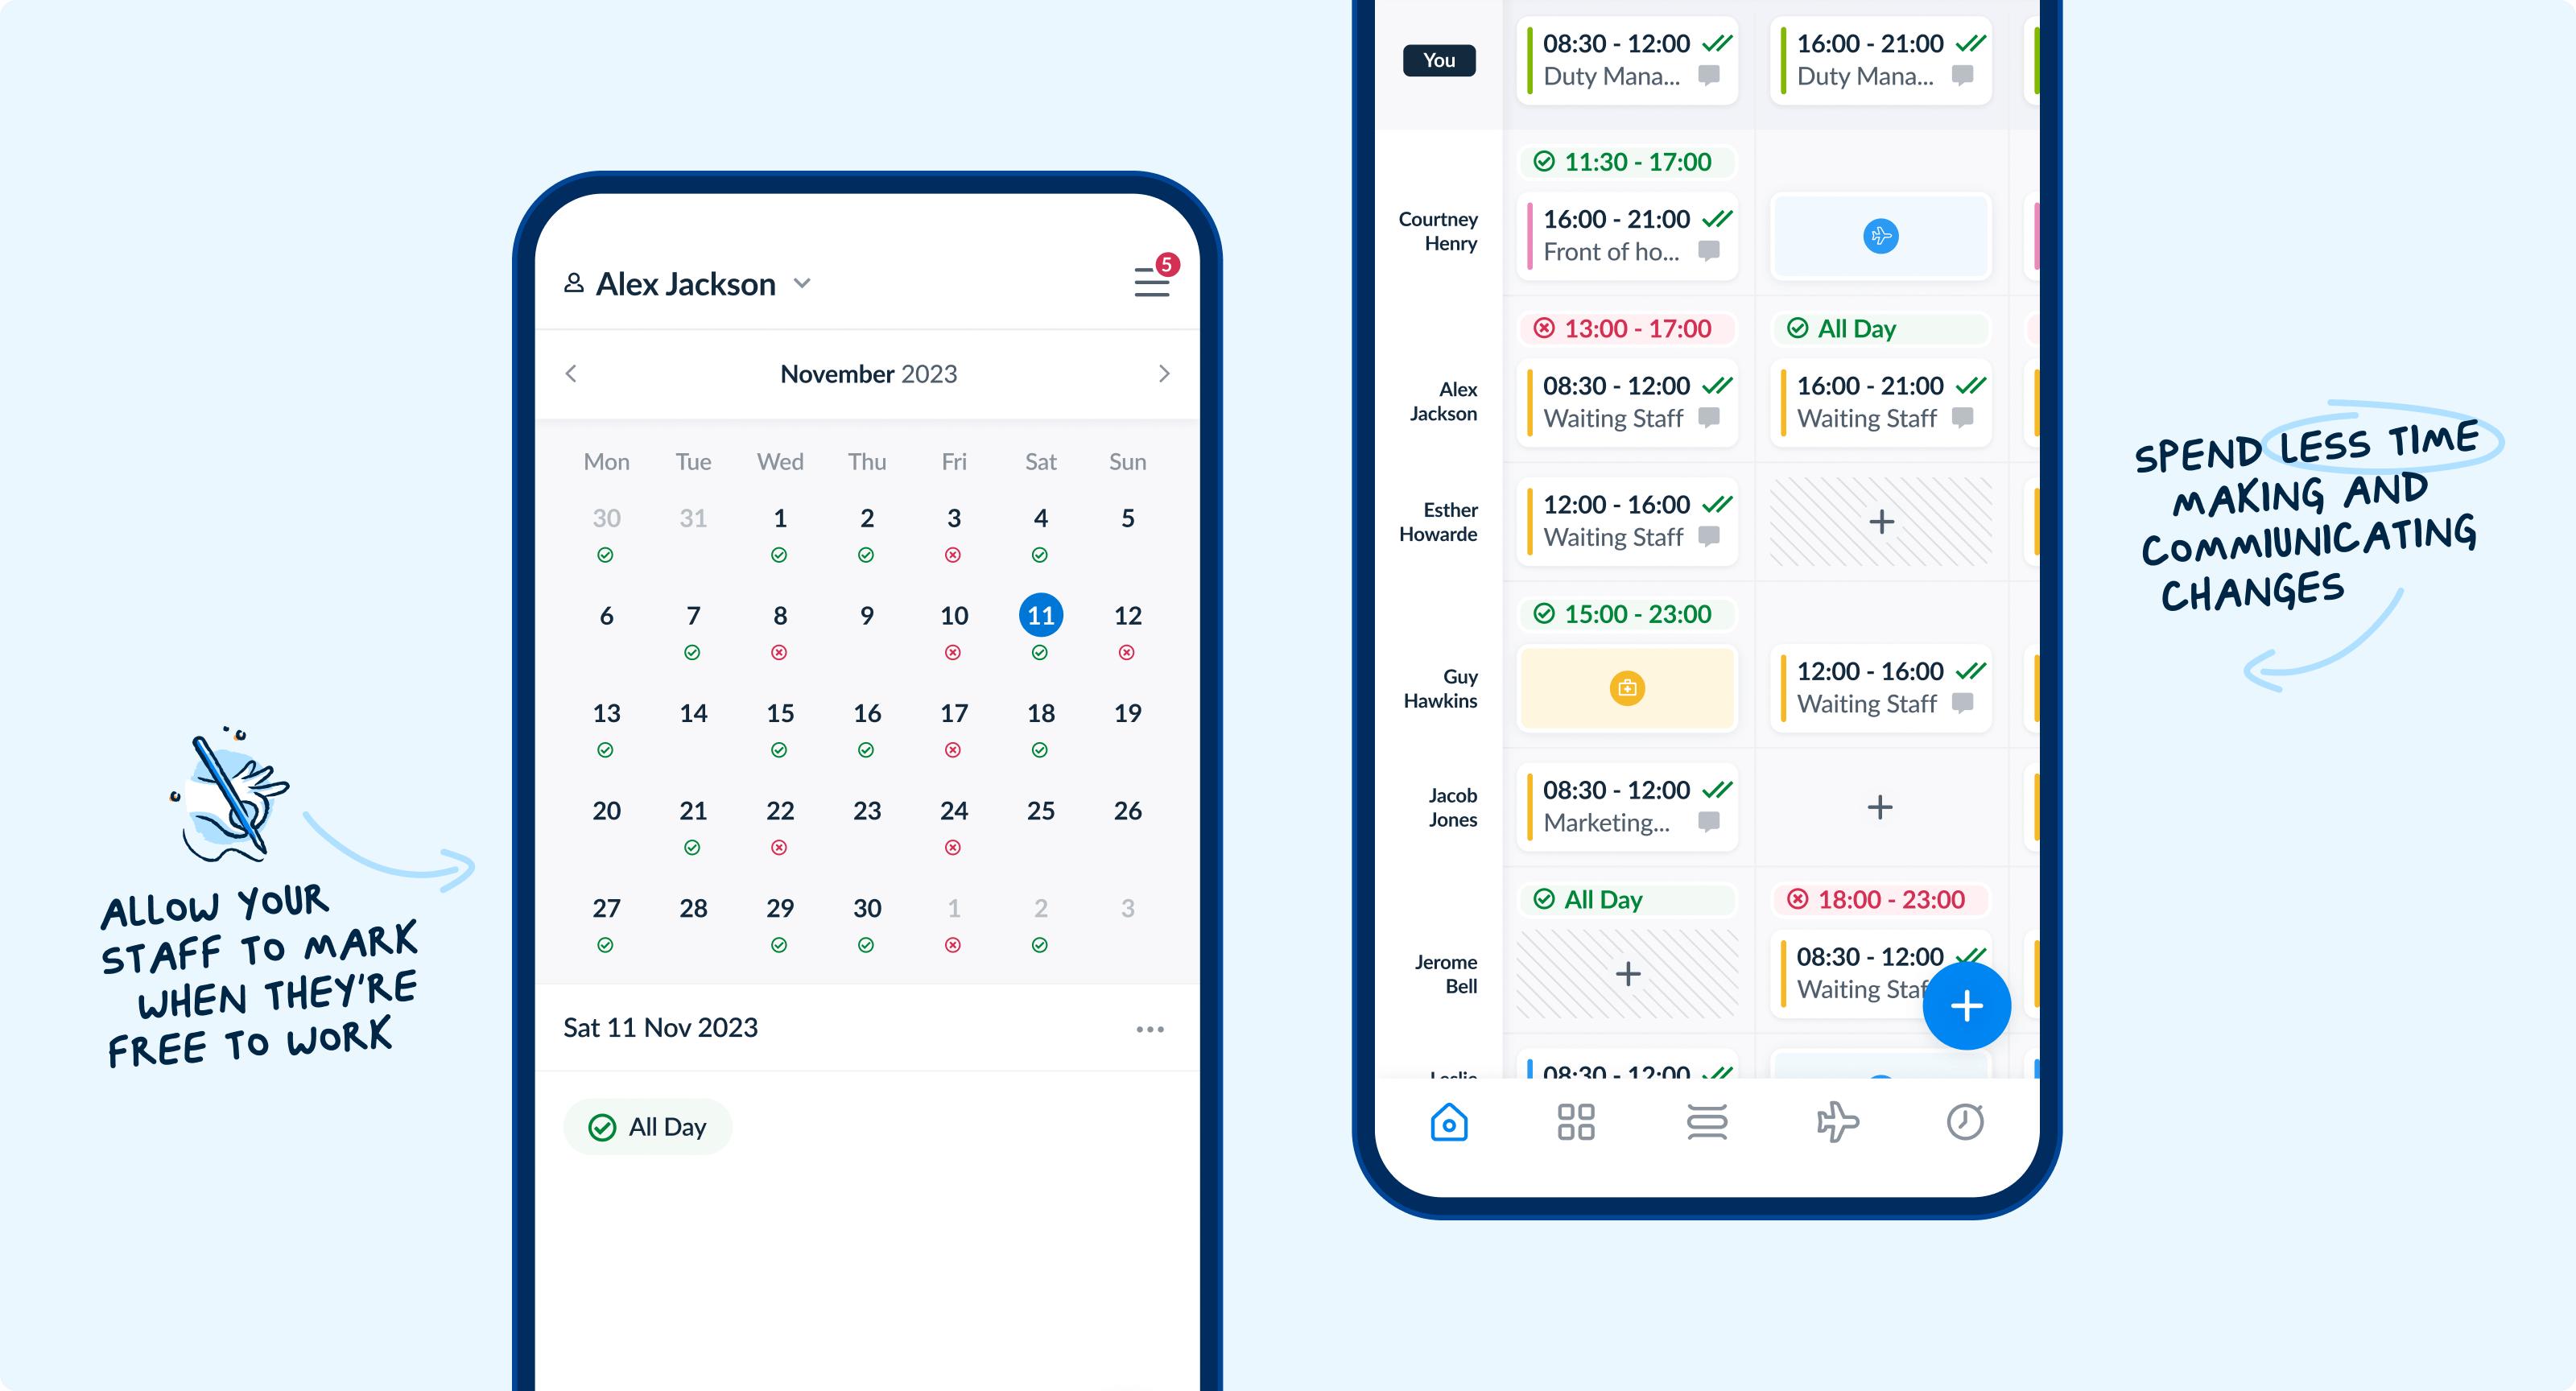 Screenshots of a calendar in the RotaCloud app marked with red and green availability and unavailability dots.